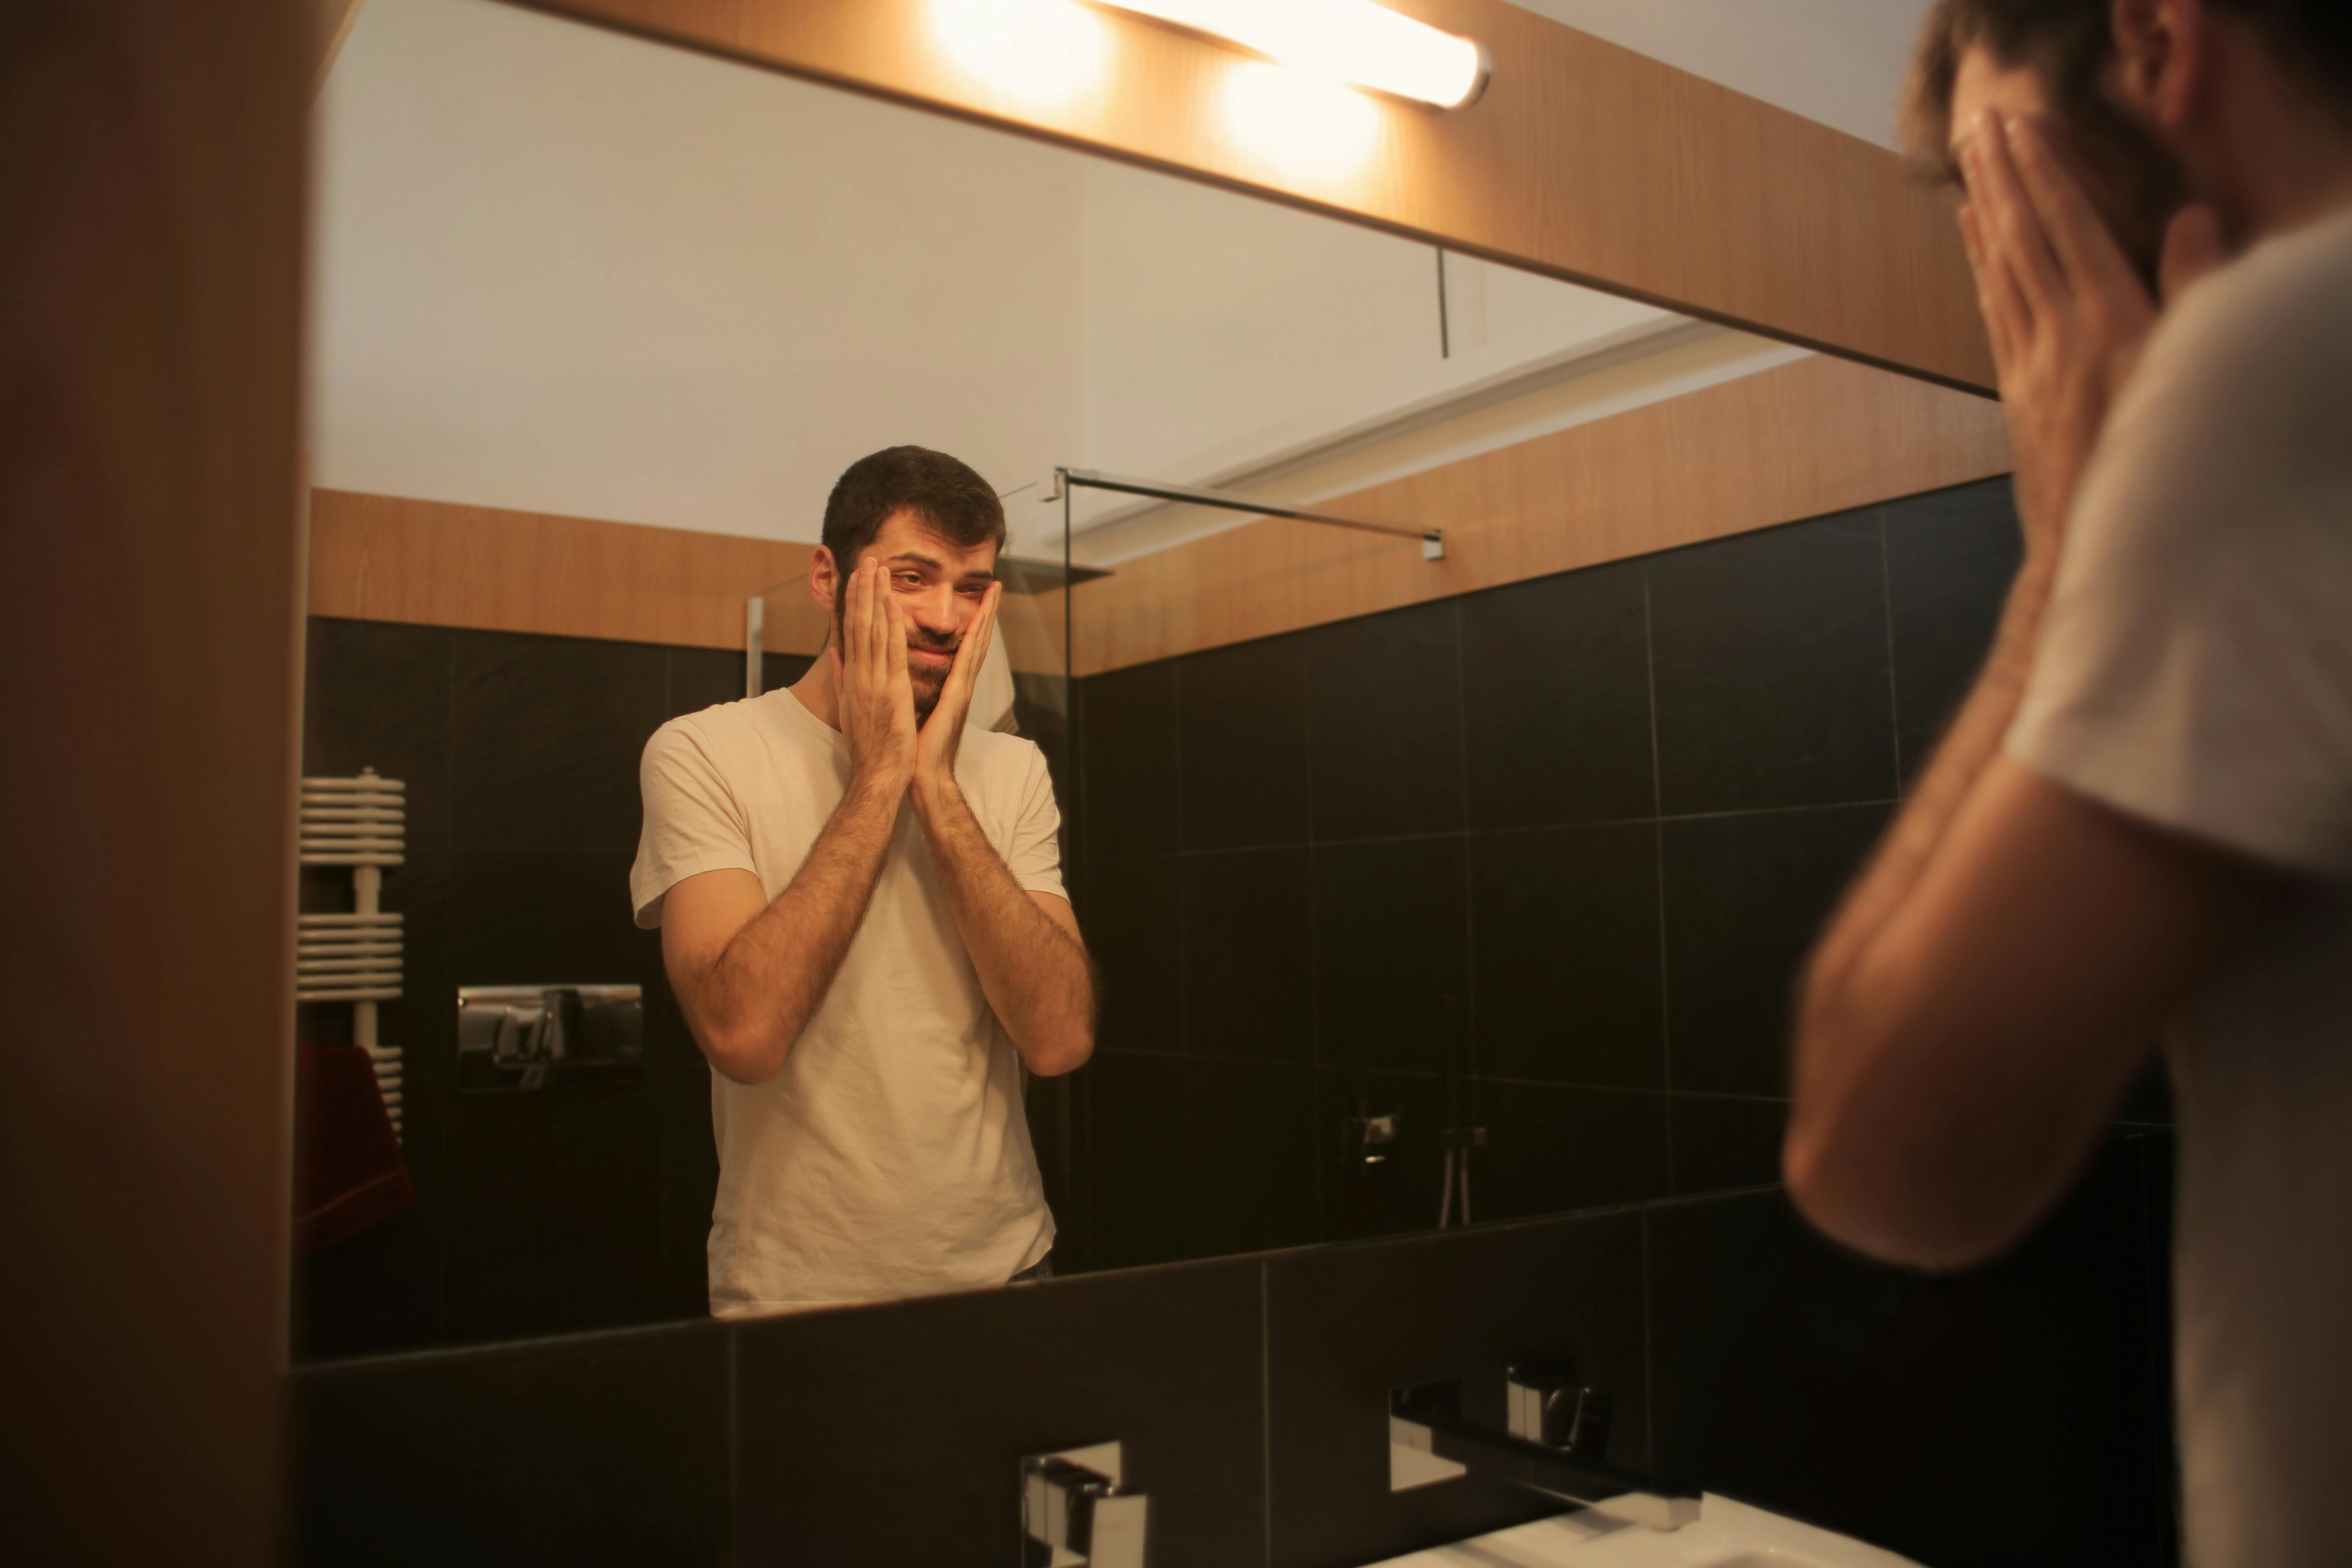 A frustrated man looking at himself in a mirror | Source: Pexels